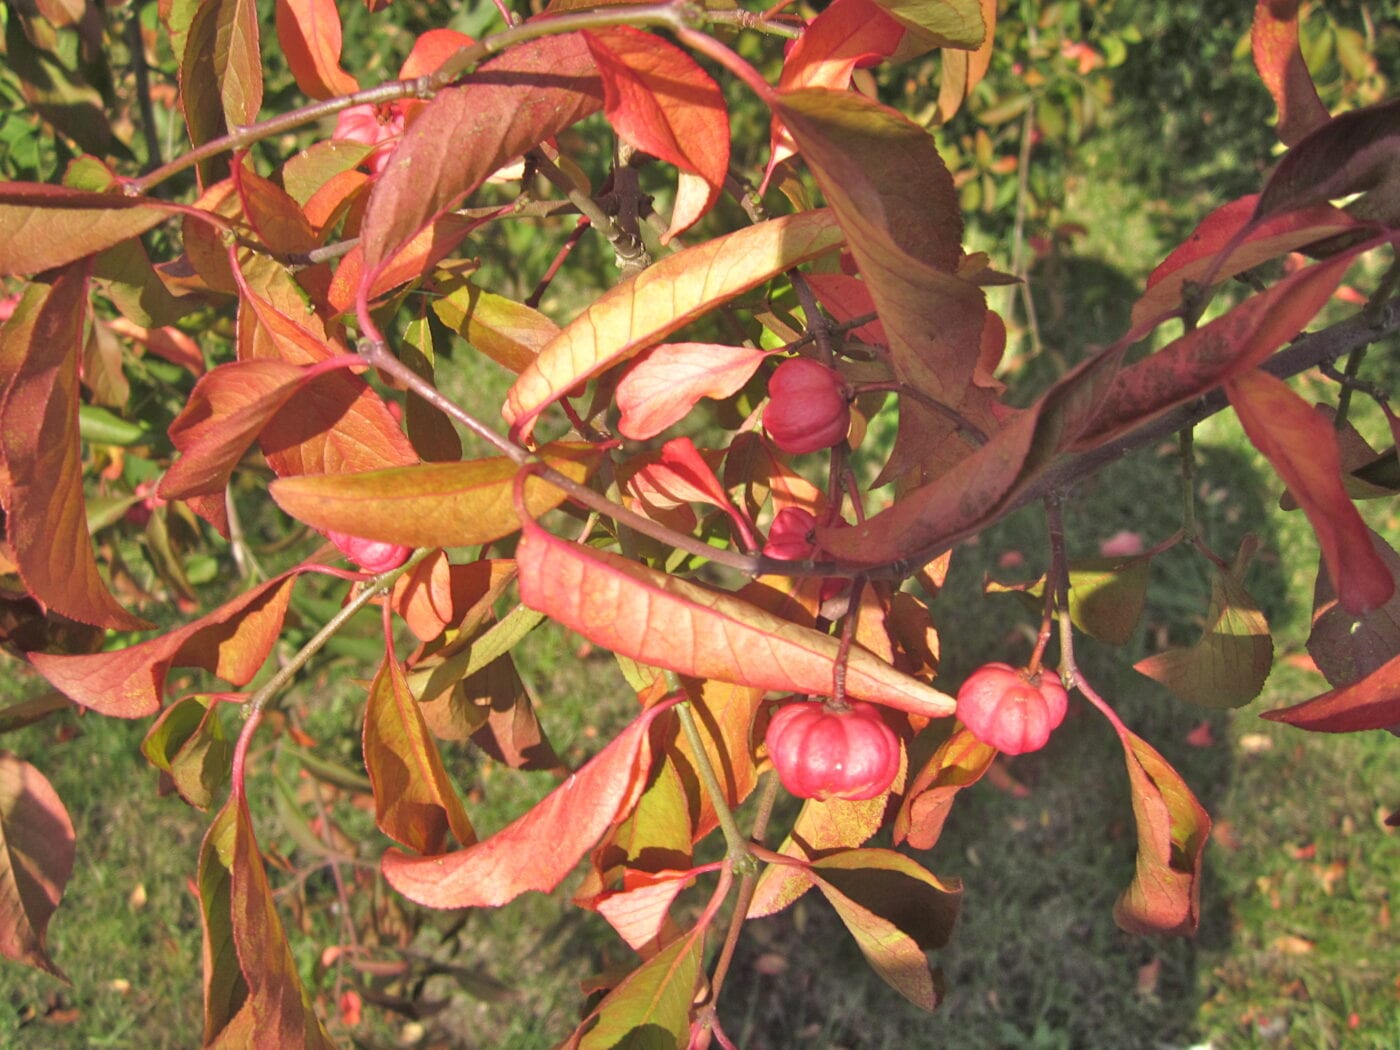 Spindle tree leaves and fruit in autumn